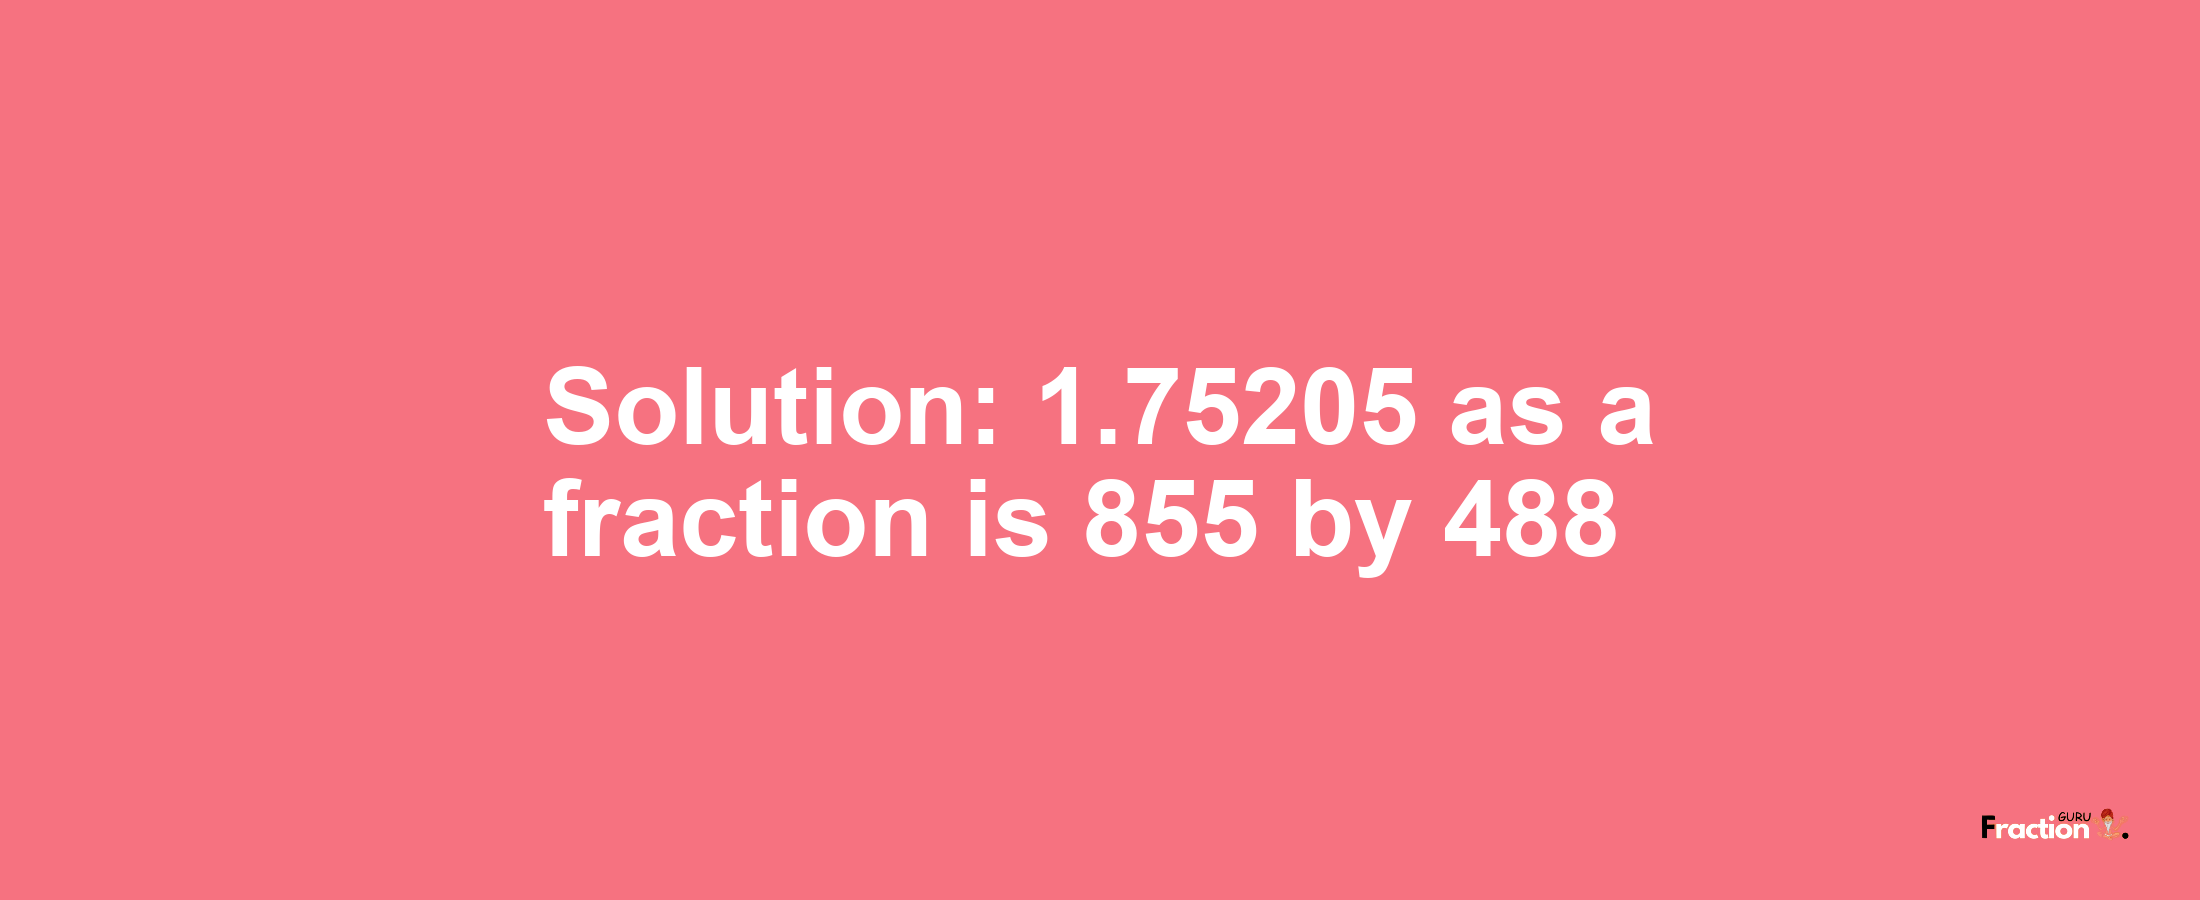 Solution:1.75205 as a fraction is 855/488